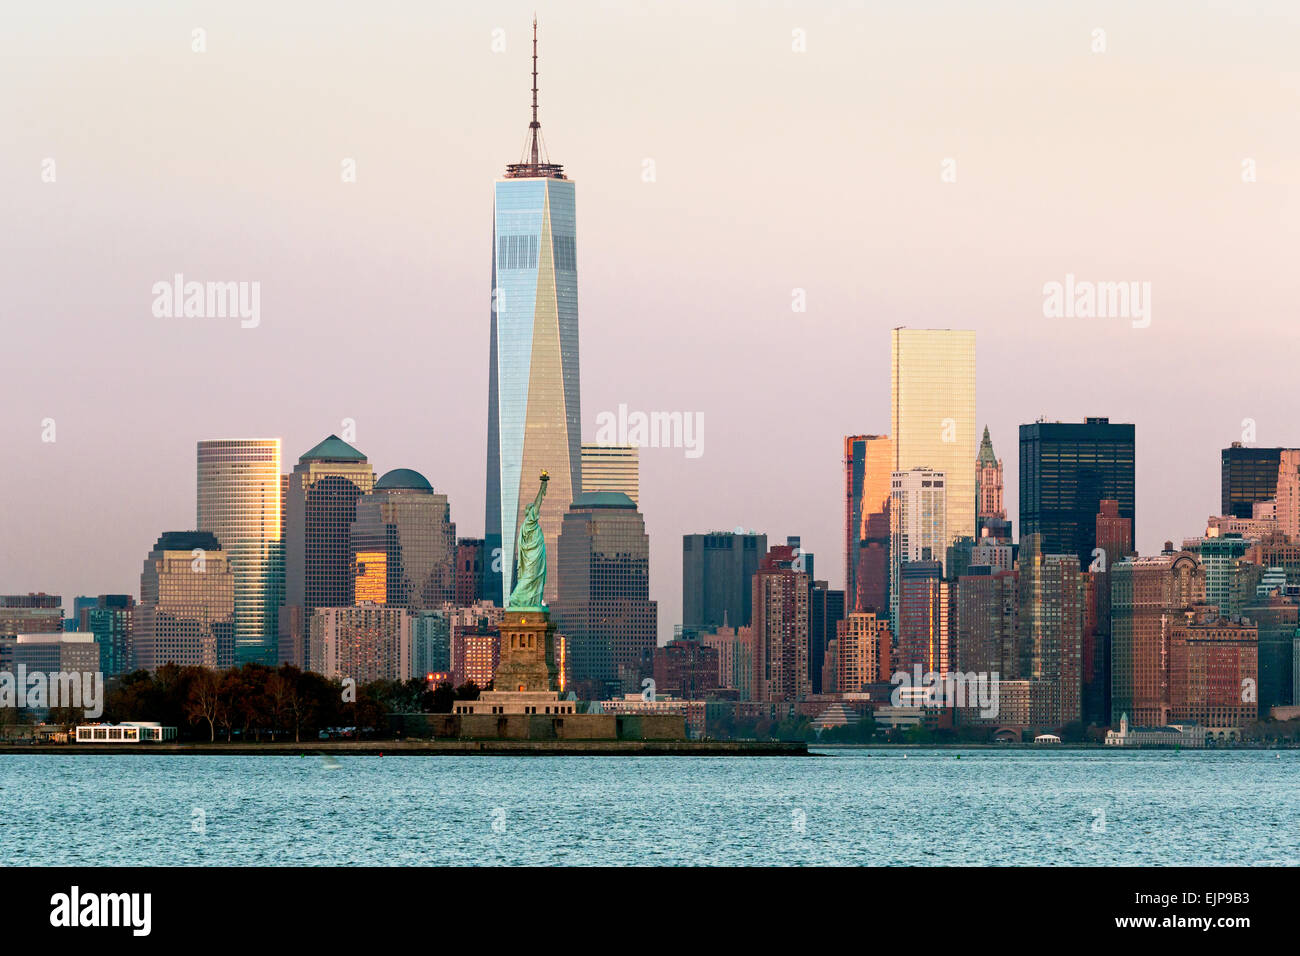 Statue of Liberty, One World Trade Center and Downtown Manhattan across the Hudson River, New York, United States of America Stock Photo